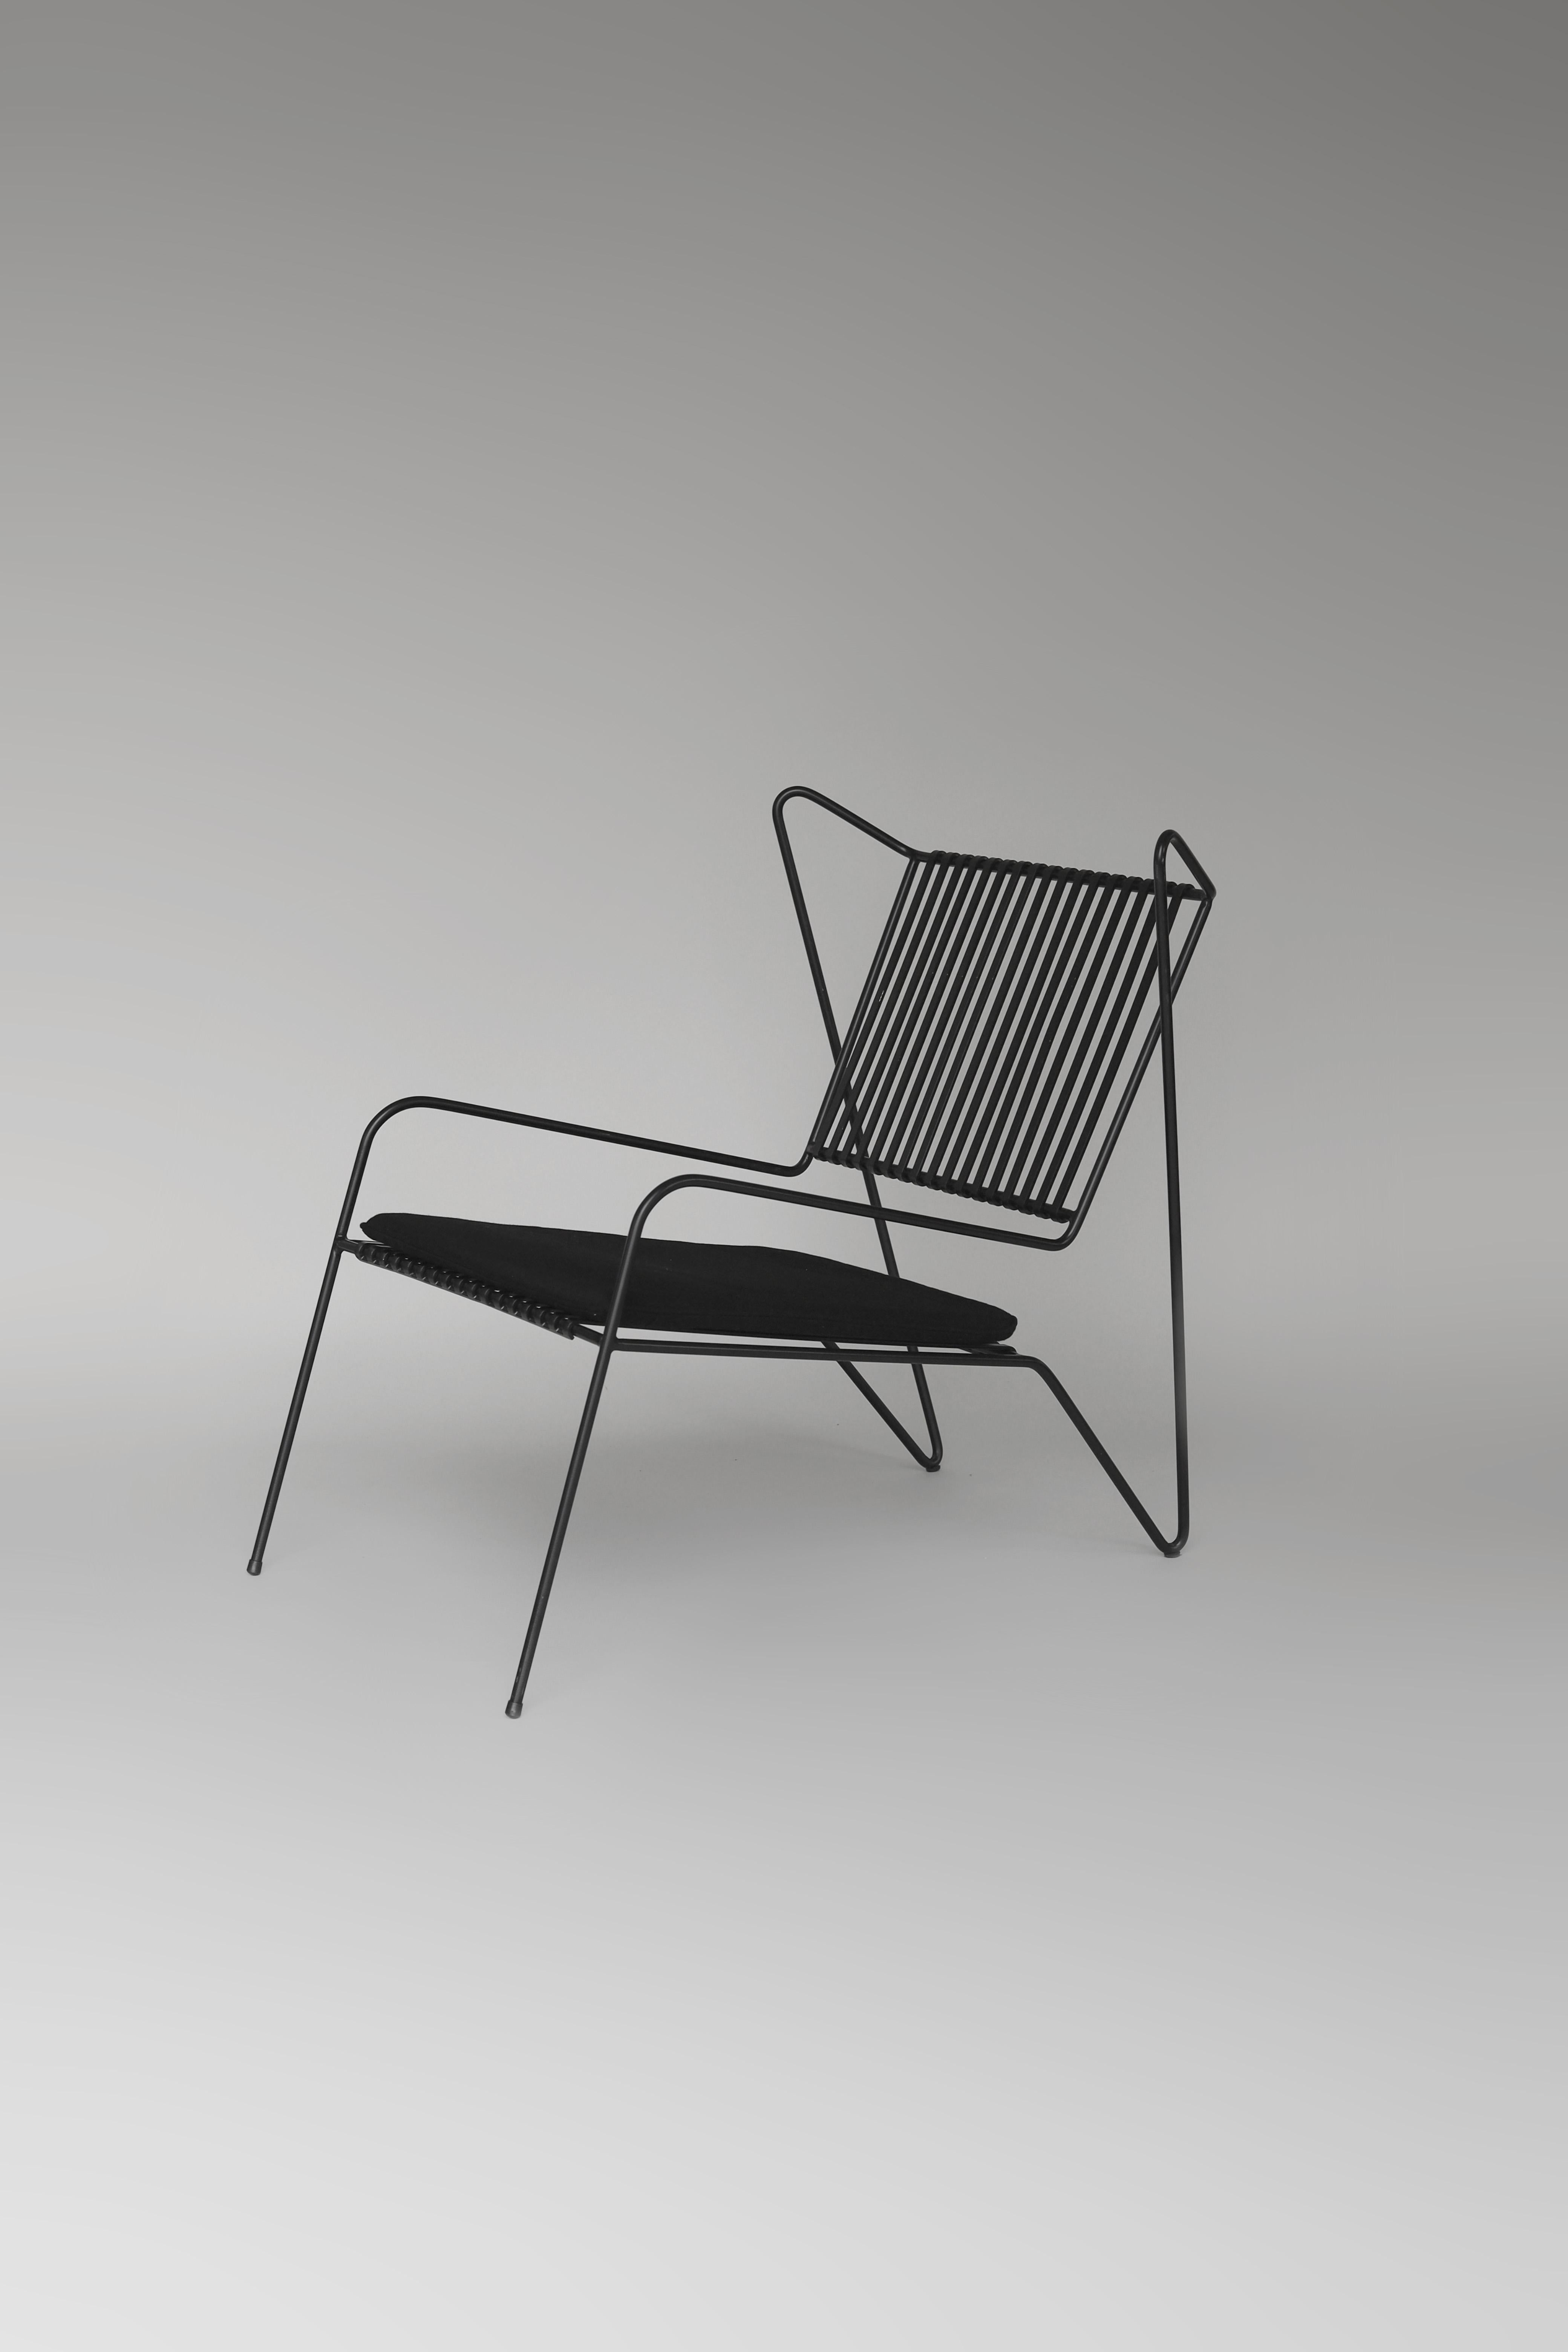 Black Capri Easy Lounge chair with seat cushion by Cools Collection
Materials: Powder coated stainless steel, fabric suitable for outdoor use.
Dimensions: Lounge Chair: W 70 x D 84 x H 78 cm (seat height 34cm).
Seat cushion: W 50 x D 53 x H